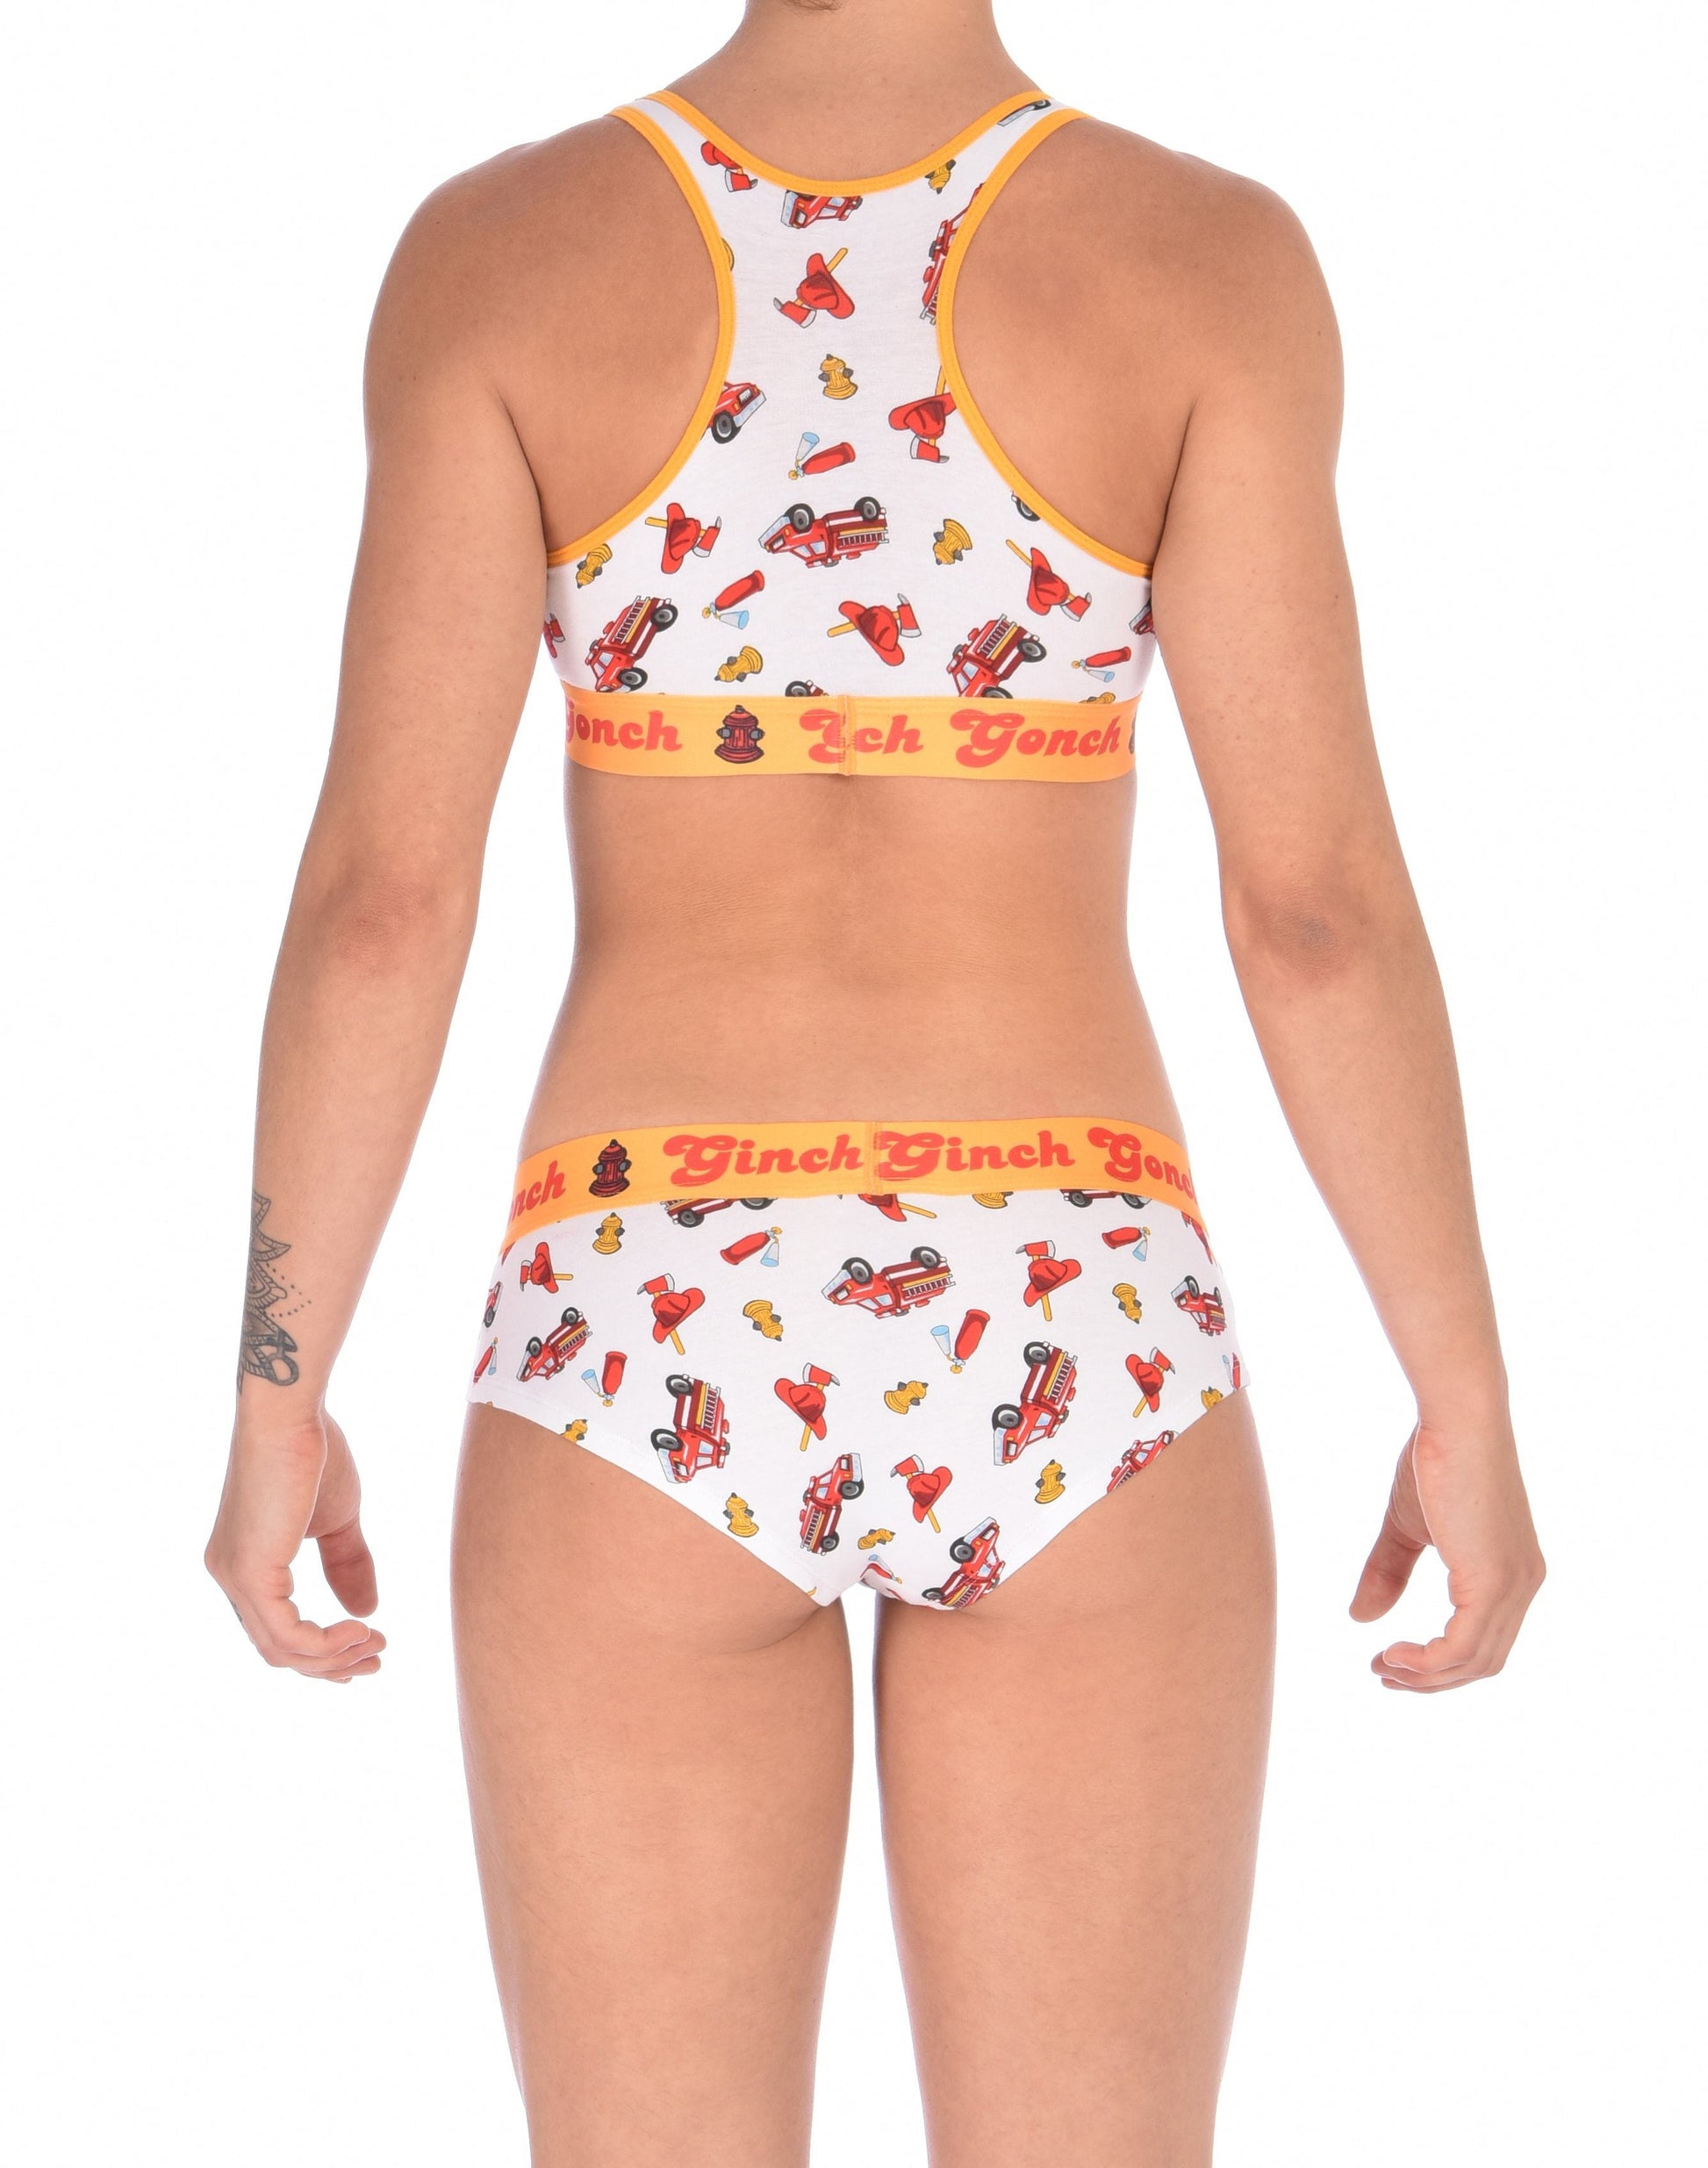 Ginch Gonch GG Fire Fighters boy cut Brief womens underwear white fabric with fire engines hats and hydrants, yellow trim and yellow printed waistband back shown with matching sports bra